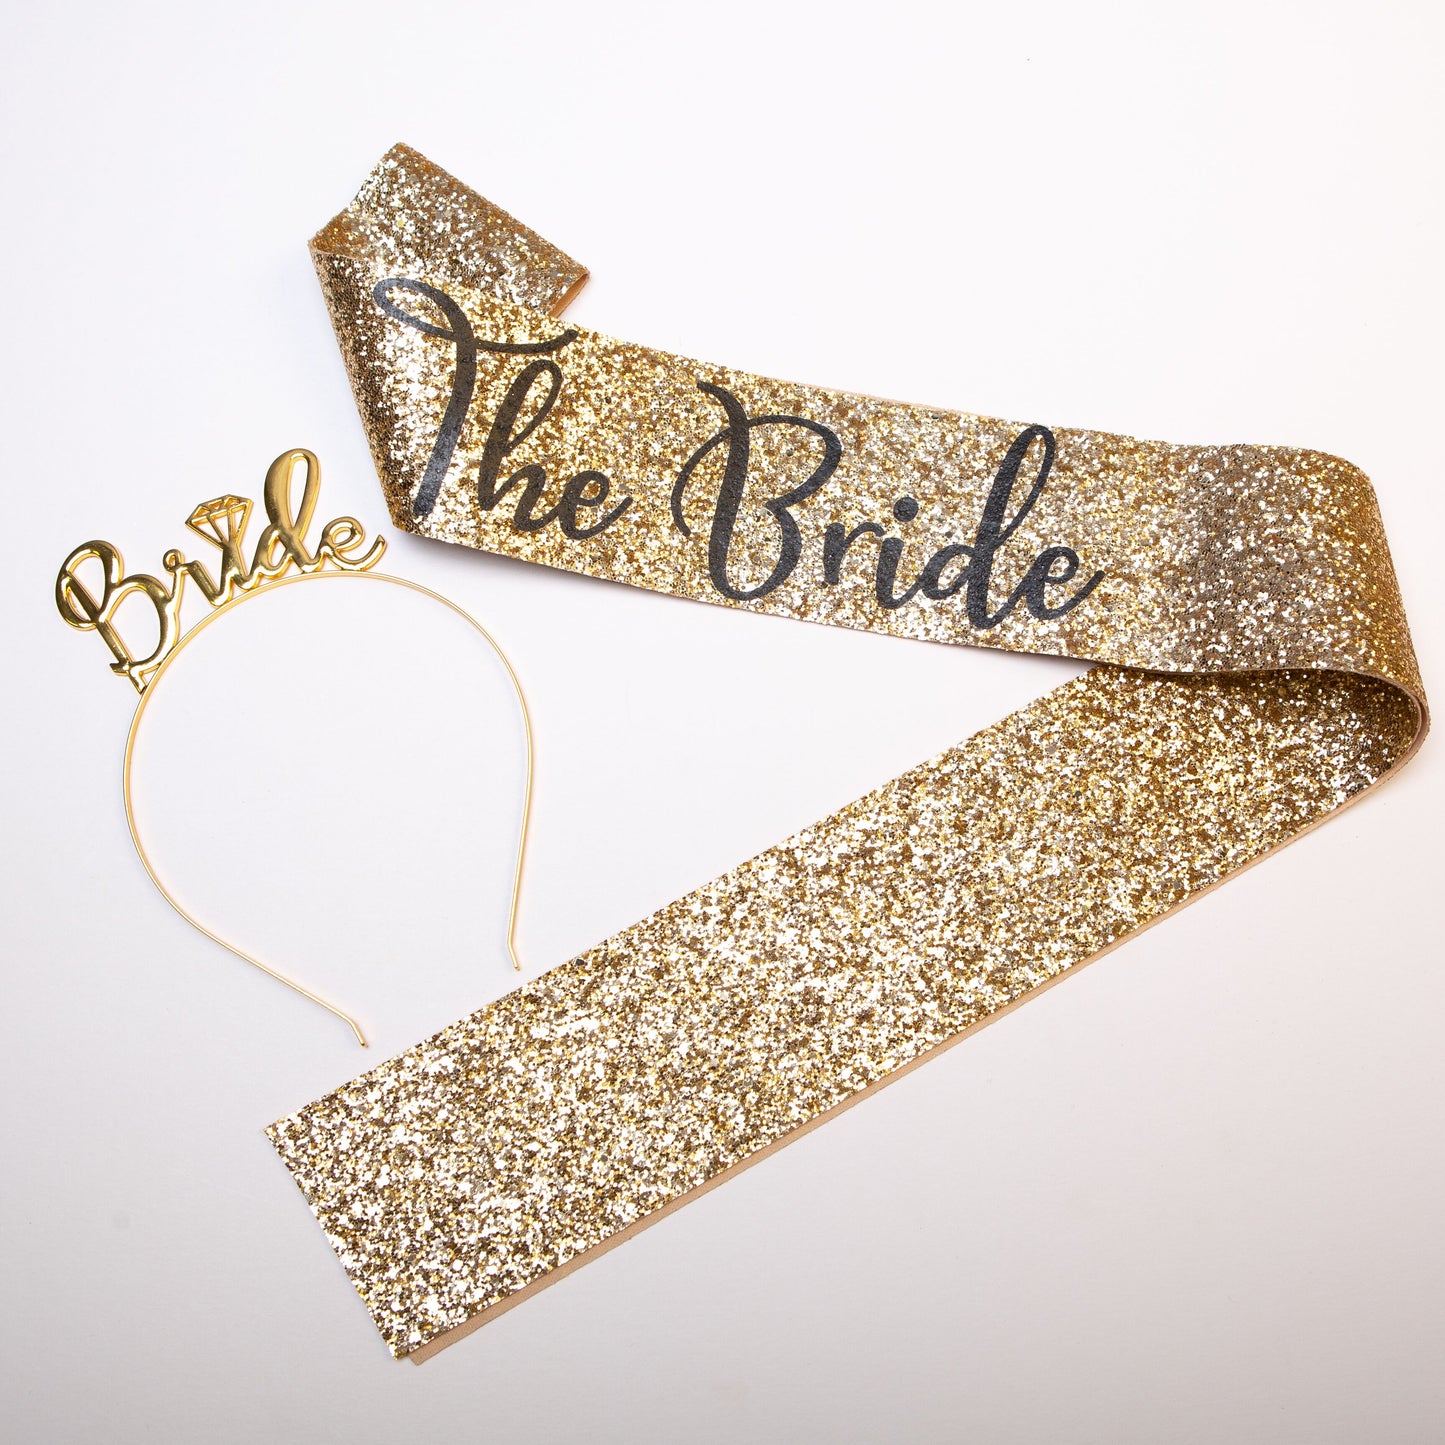 Bride hairband and sash set - Little Black Dress Hen Party